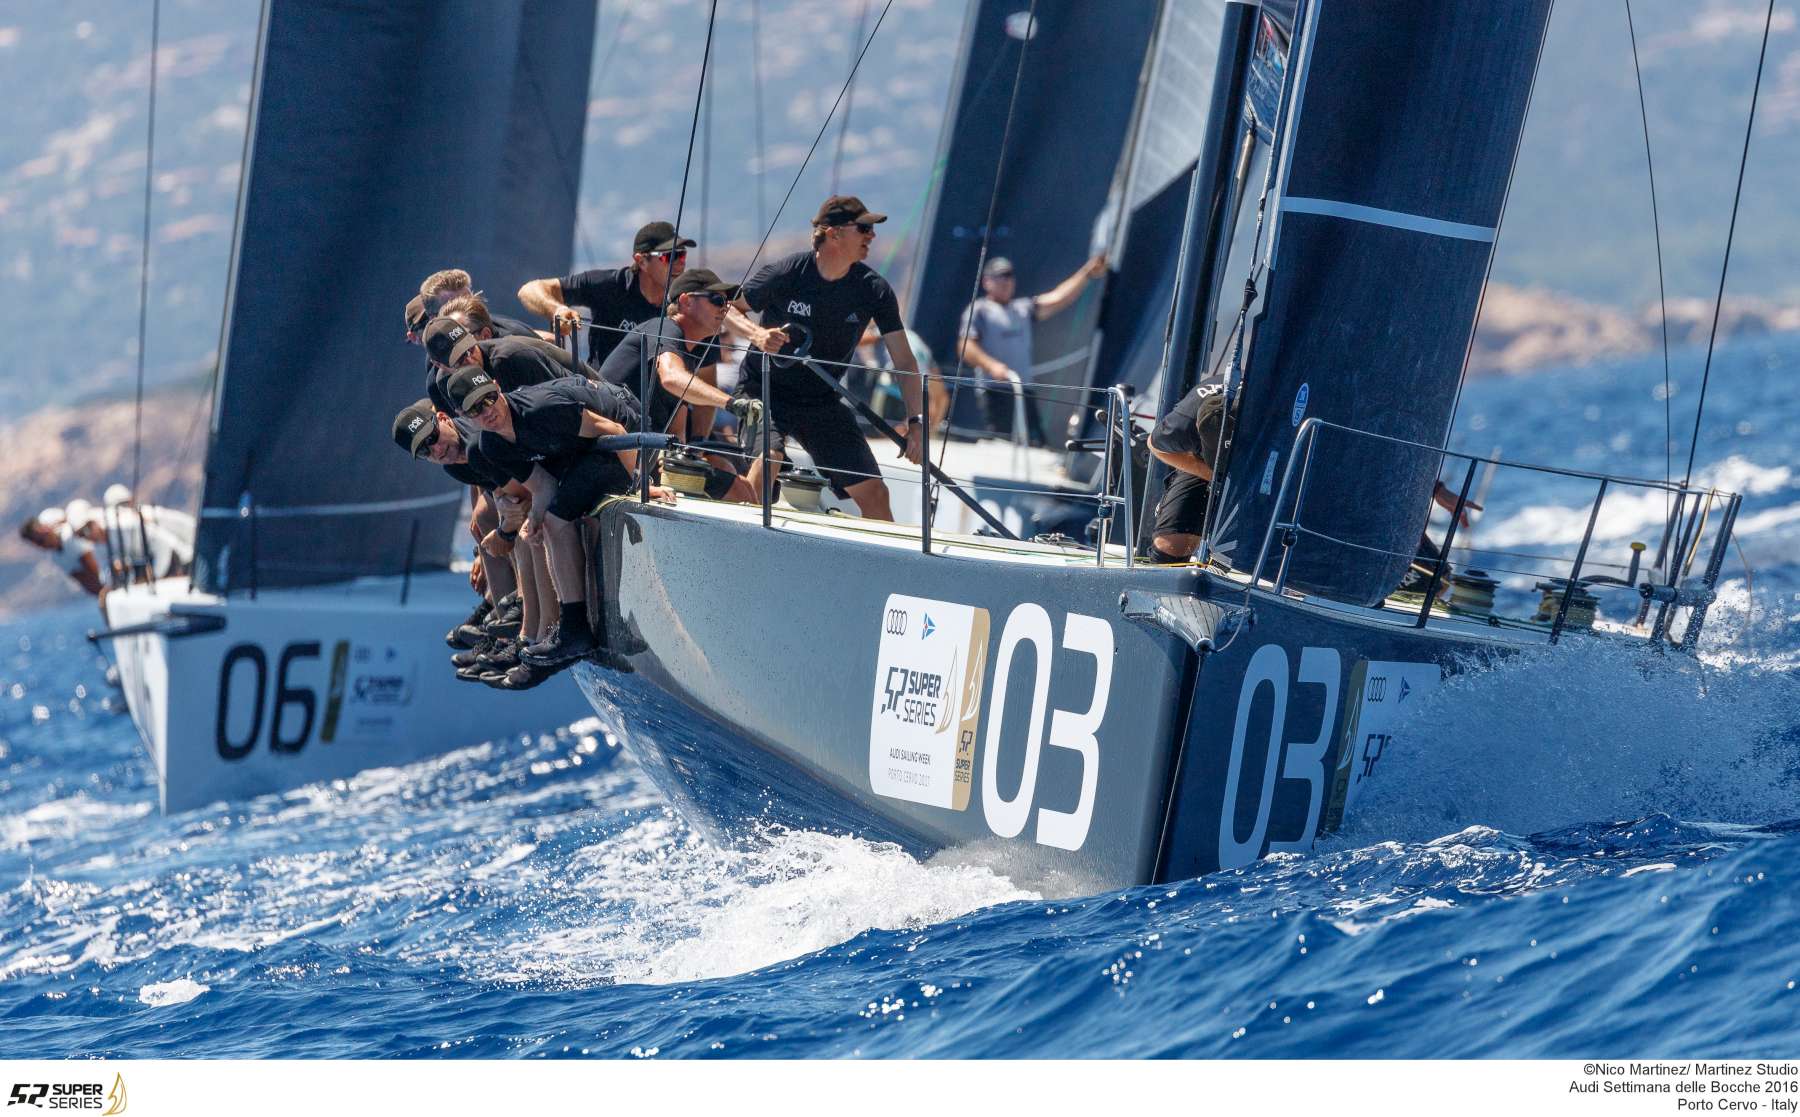 Provisional results are shaken up at the Audi Sailing Week - 52 Super Series - NEWS - Yacht Club Costa Smeralda